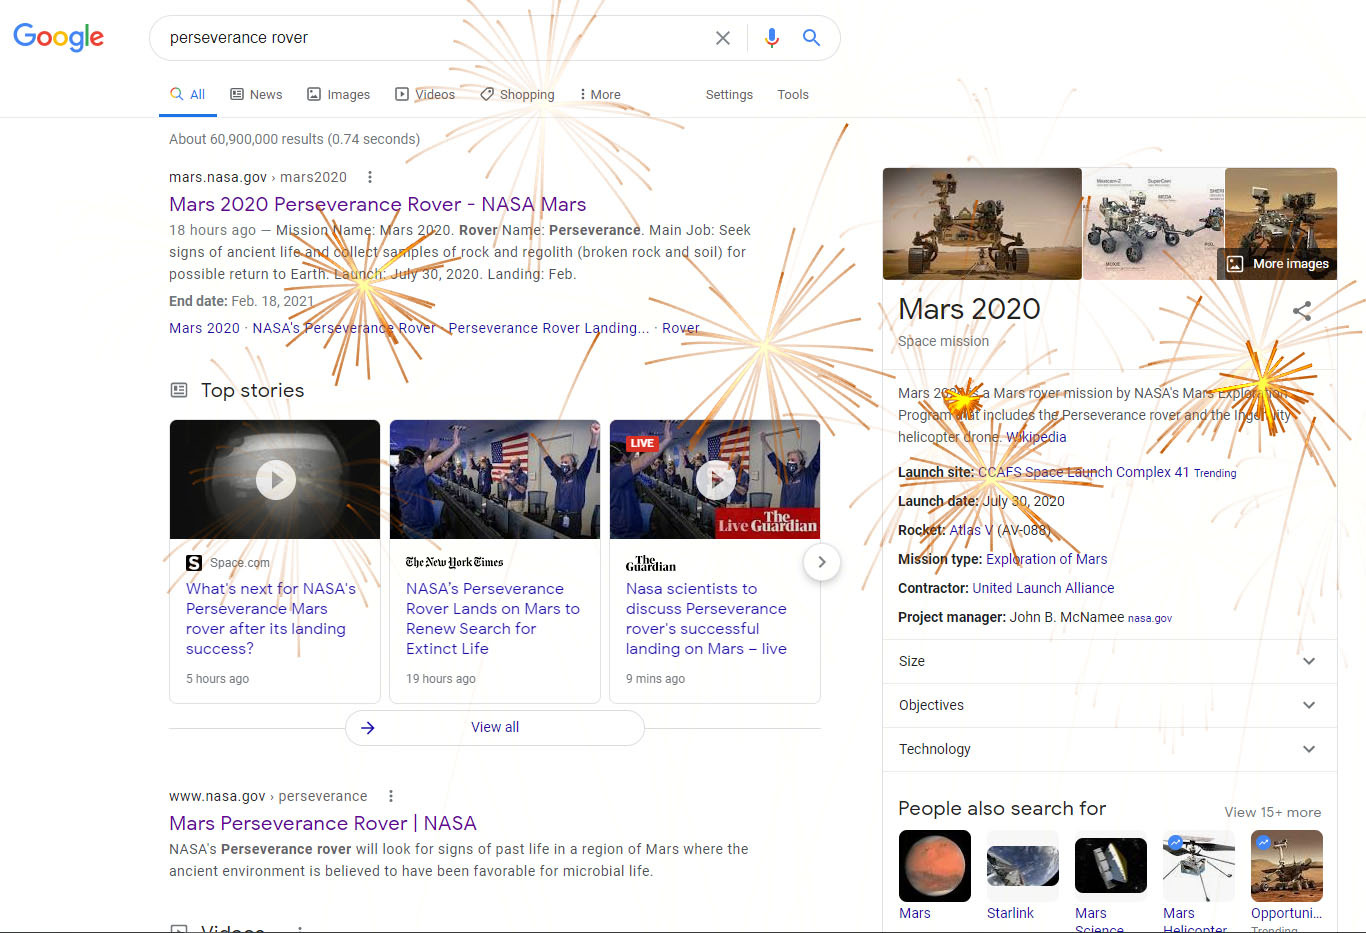 Google ‘Perseverance rover’ right this moment time for a fun Mars touchdown shock